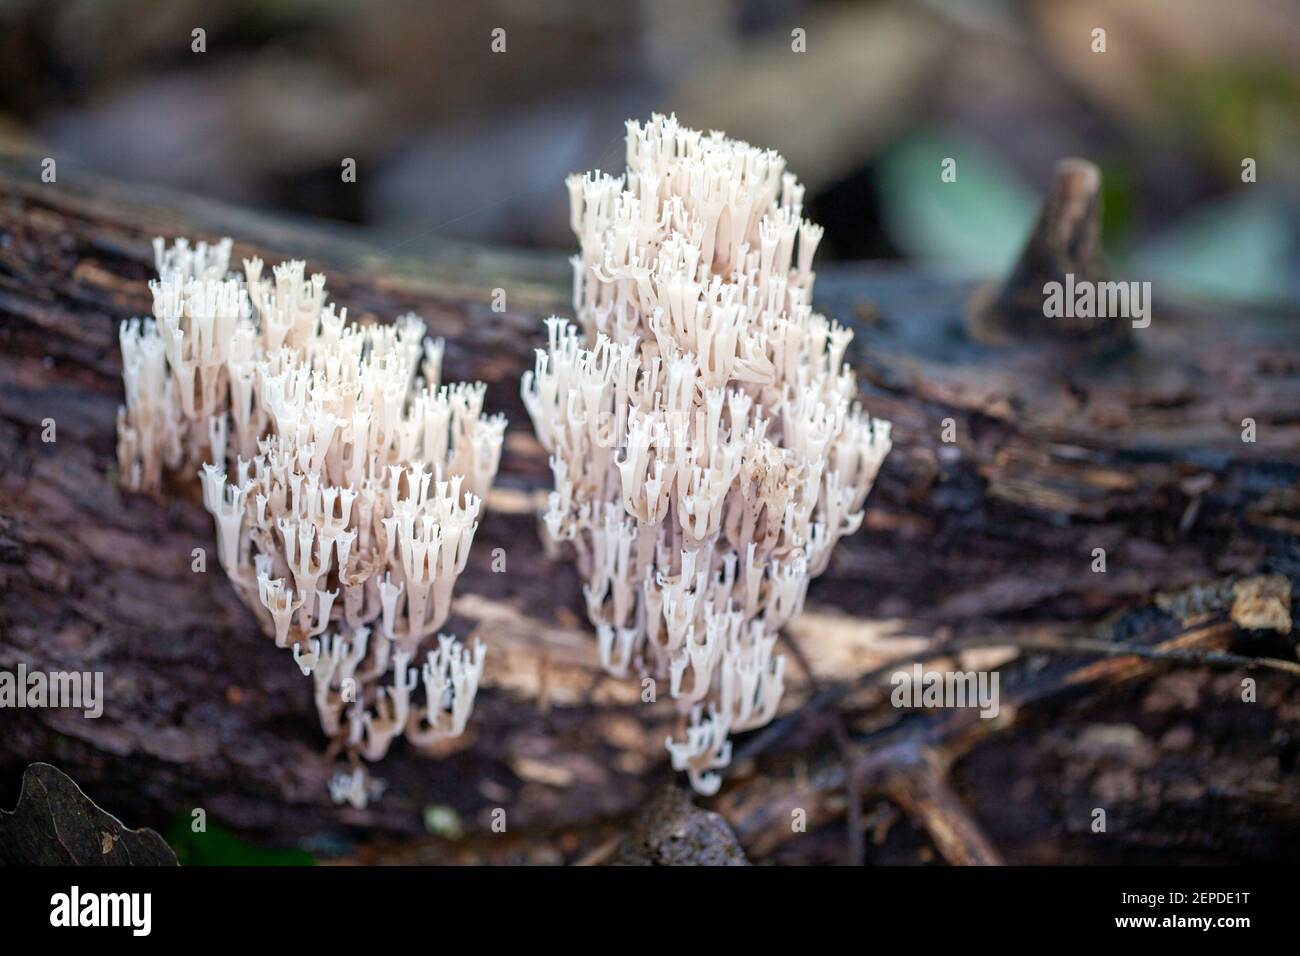 Close up of beautiful and eatable white coral mushrooms called 'Clavulina crostata', growing off a wet tree branch in the forest. Background blurred. Stock Photo